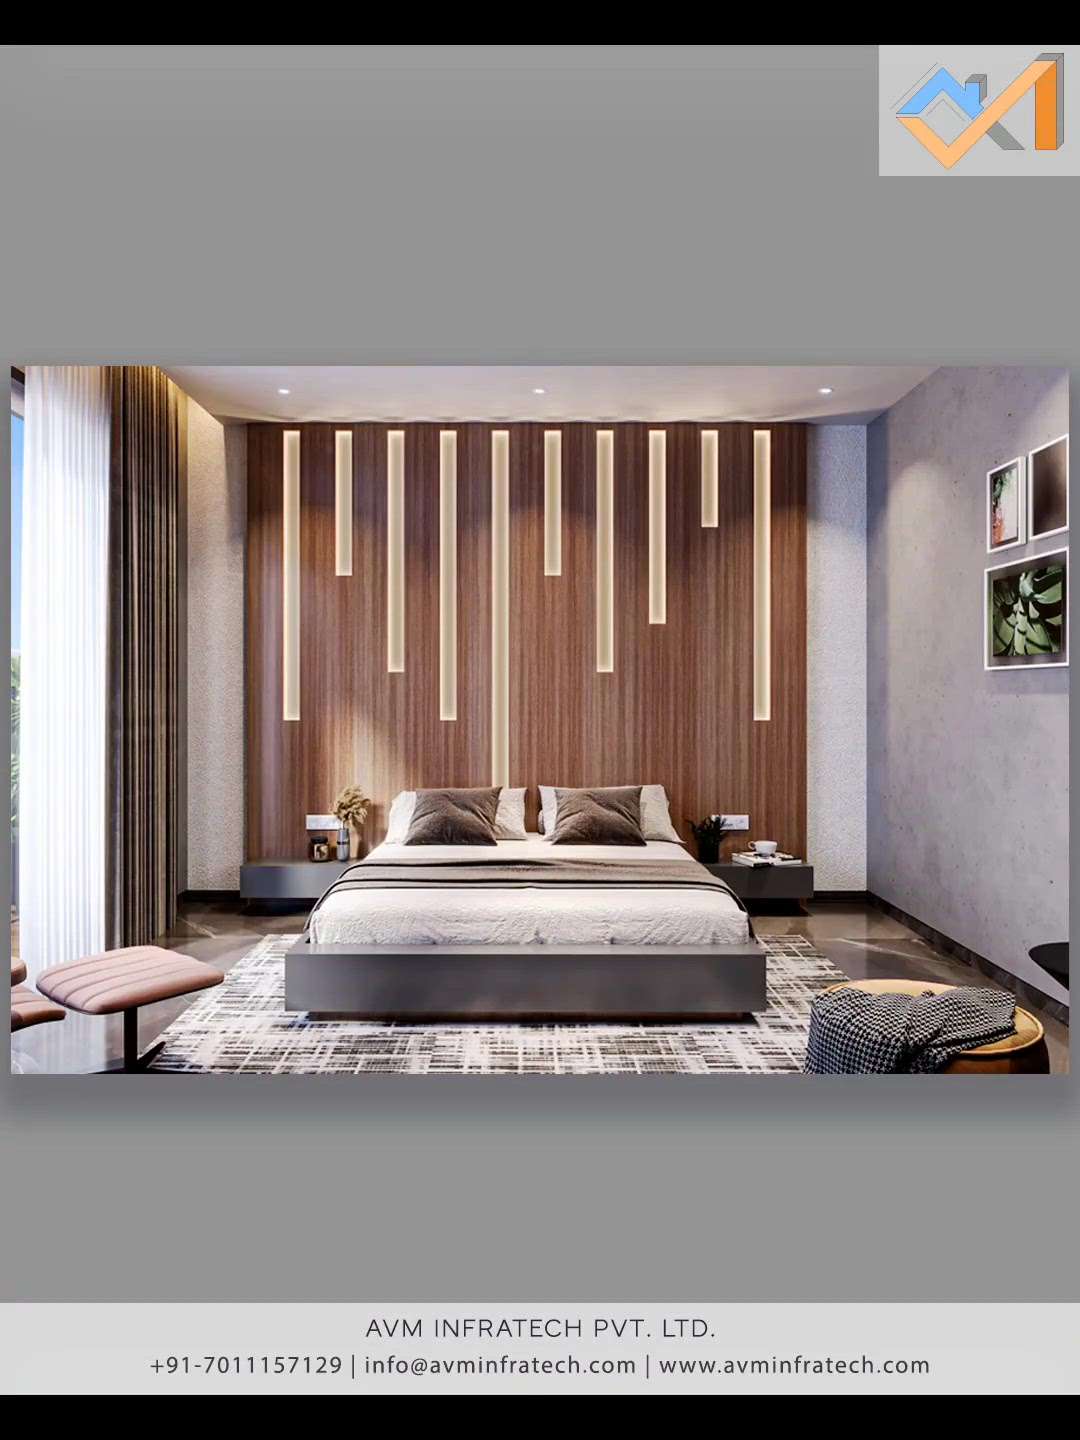 Layer your unique aesthetic on a carefully thought out backdrop of a modern-style bedroom interior design.


Follow us for more such amazing updates.
.
.
#aesthetic #aesthetics #ａｅｓｔｈｅｔｉｃ #aestheticedits #aesthetically #aestheticposts #aestheticgrunge #aestheticedit #bedroomdecor #backdrop #backdropengagement #backdroprustic #bedbackdesign #bed #design #wall #walldecor #walldecoration #walldesign #avminfratech #wallpanelling #wallpanel